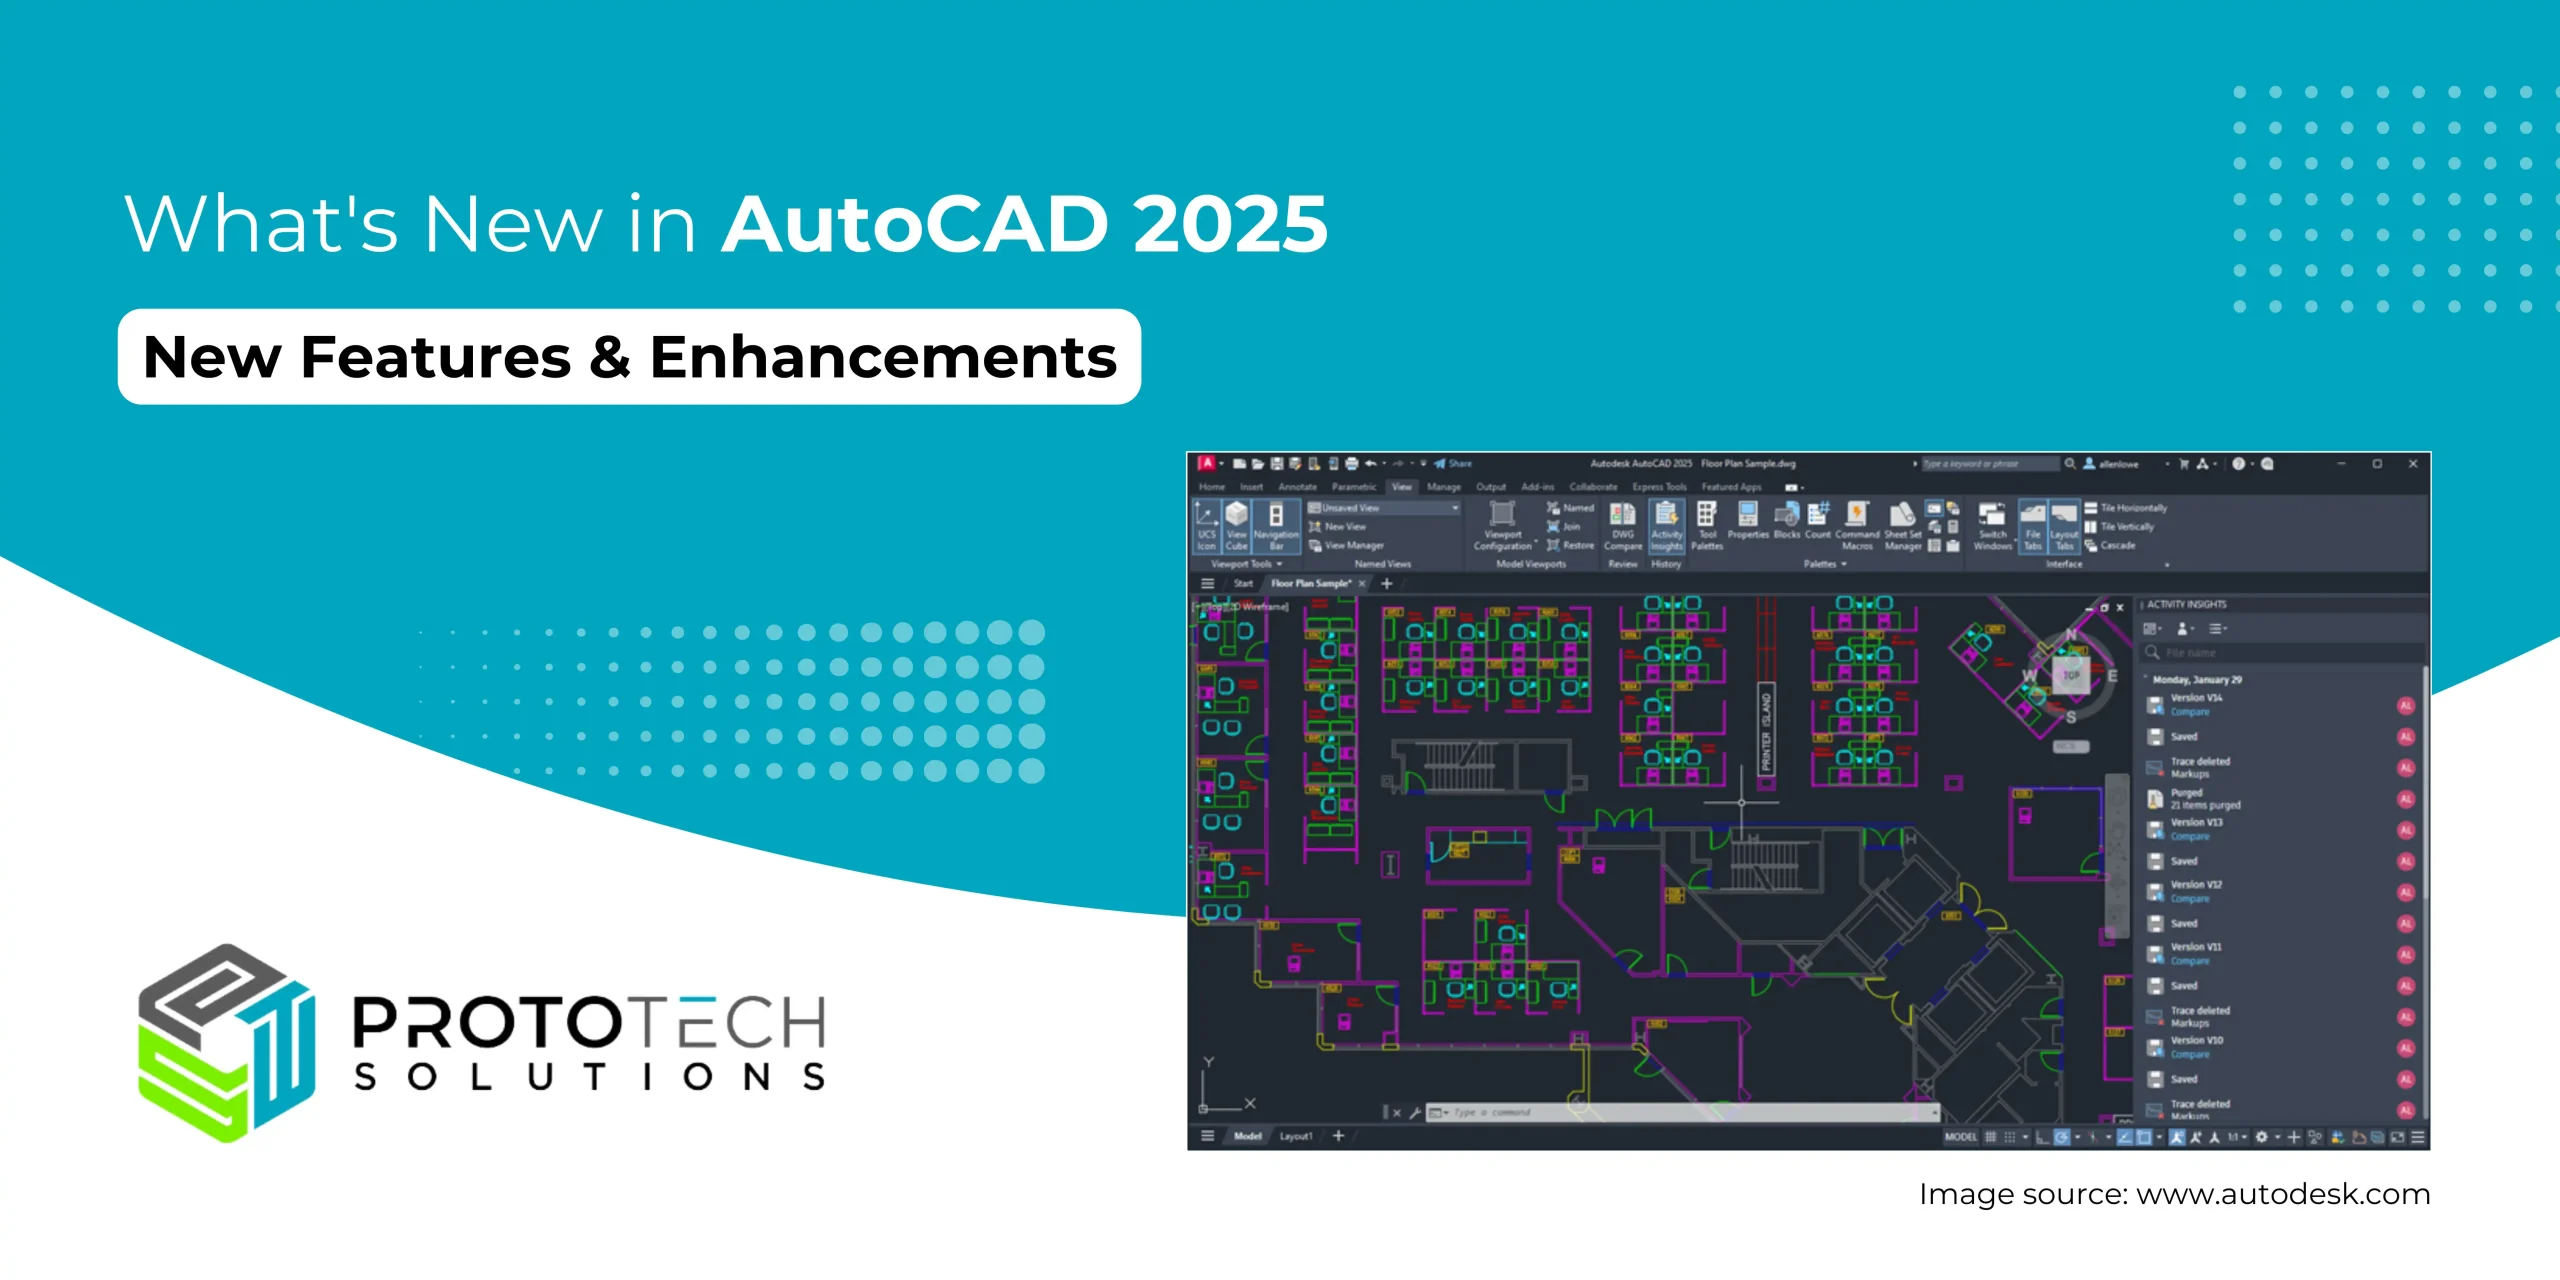 What's New in AutoCAD 2025